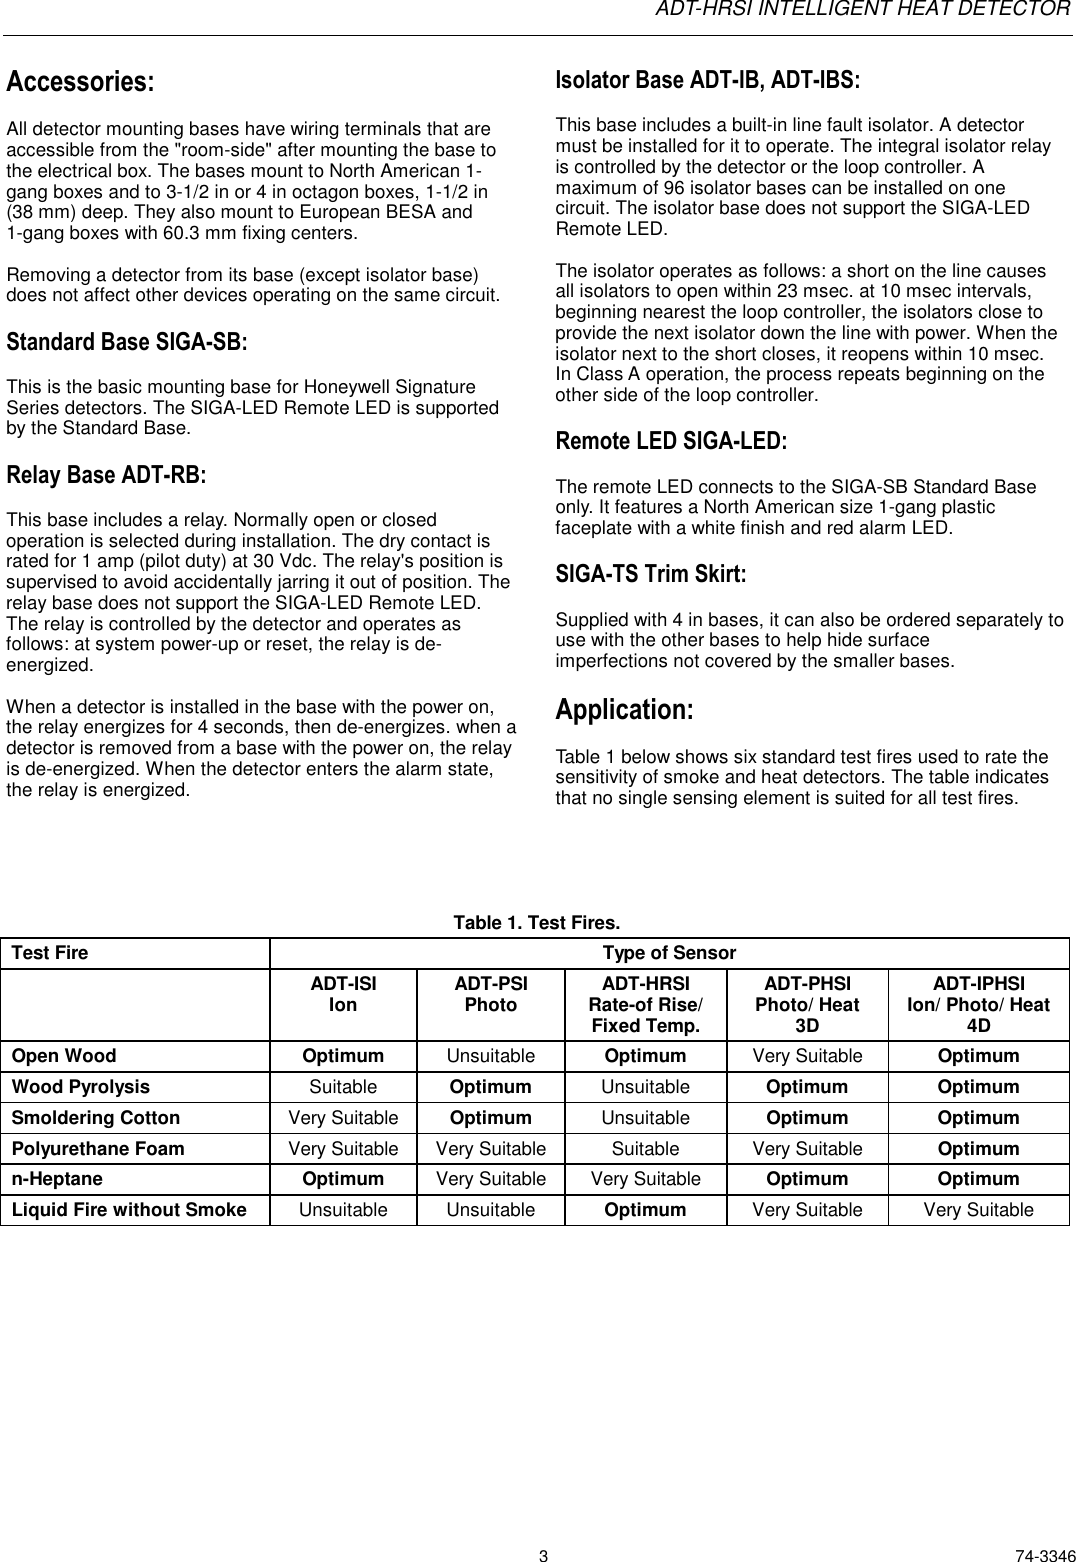 Page 3 of 4 - Honeywell Honeywell-Excel-Adt-Hrsi-Users-Manual- 74-3346 - ADT-HRSI Intelligent Heat Detector  Honeywell-excel-adt-hrsi-users-manual